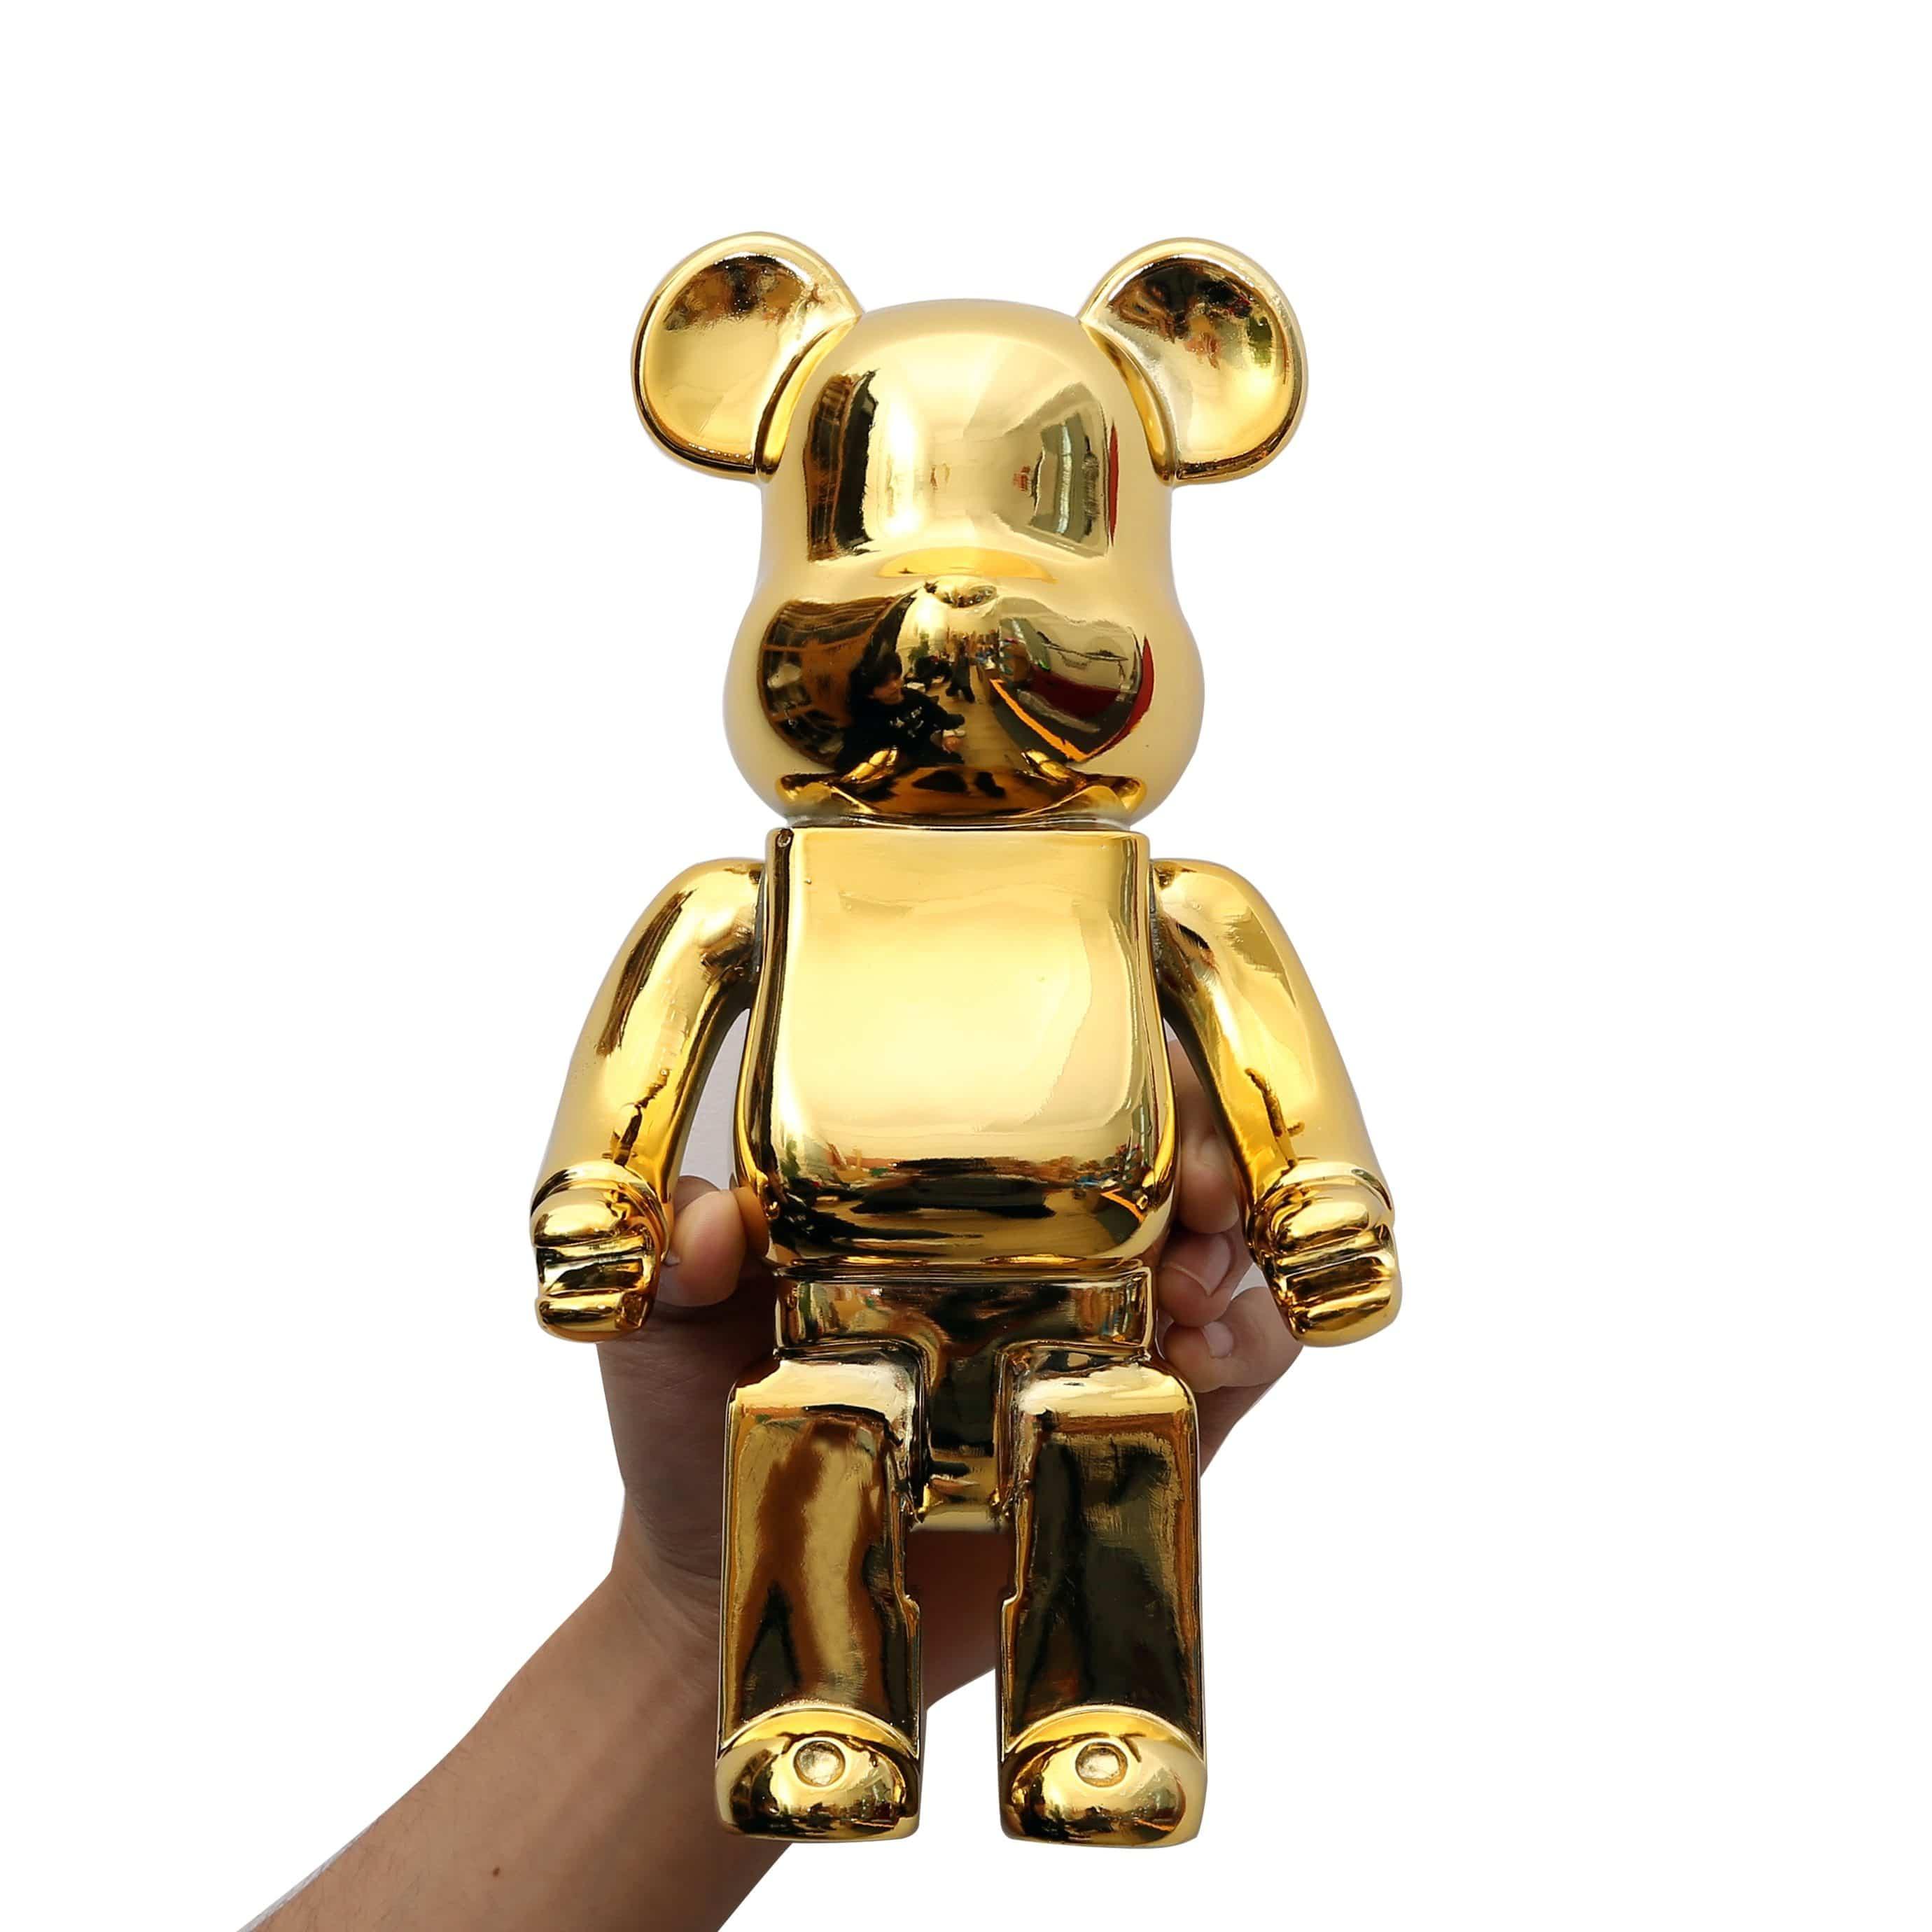 Shop 0 Bearbrick Home Decoration 28Cm Bearbrick 400% Be@rbrick Games New Year's Gift Tide Play Model Plating Resin Electronic Games Kids Toys Mademoiselle Home Decor